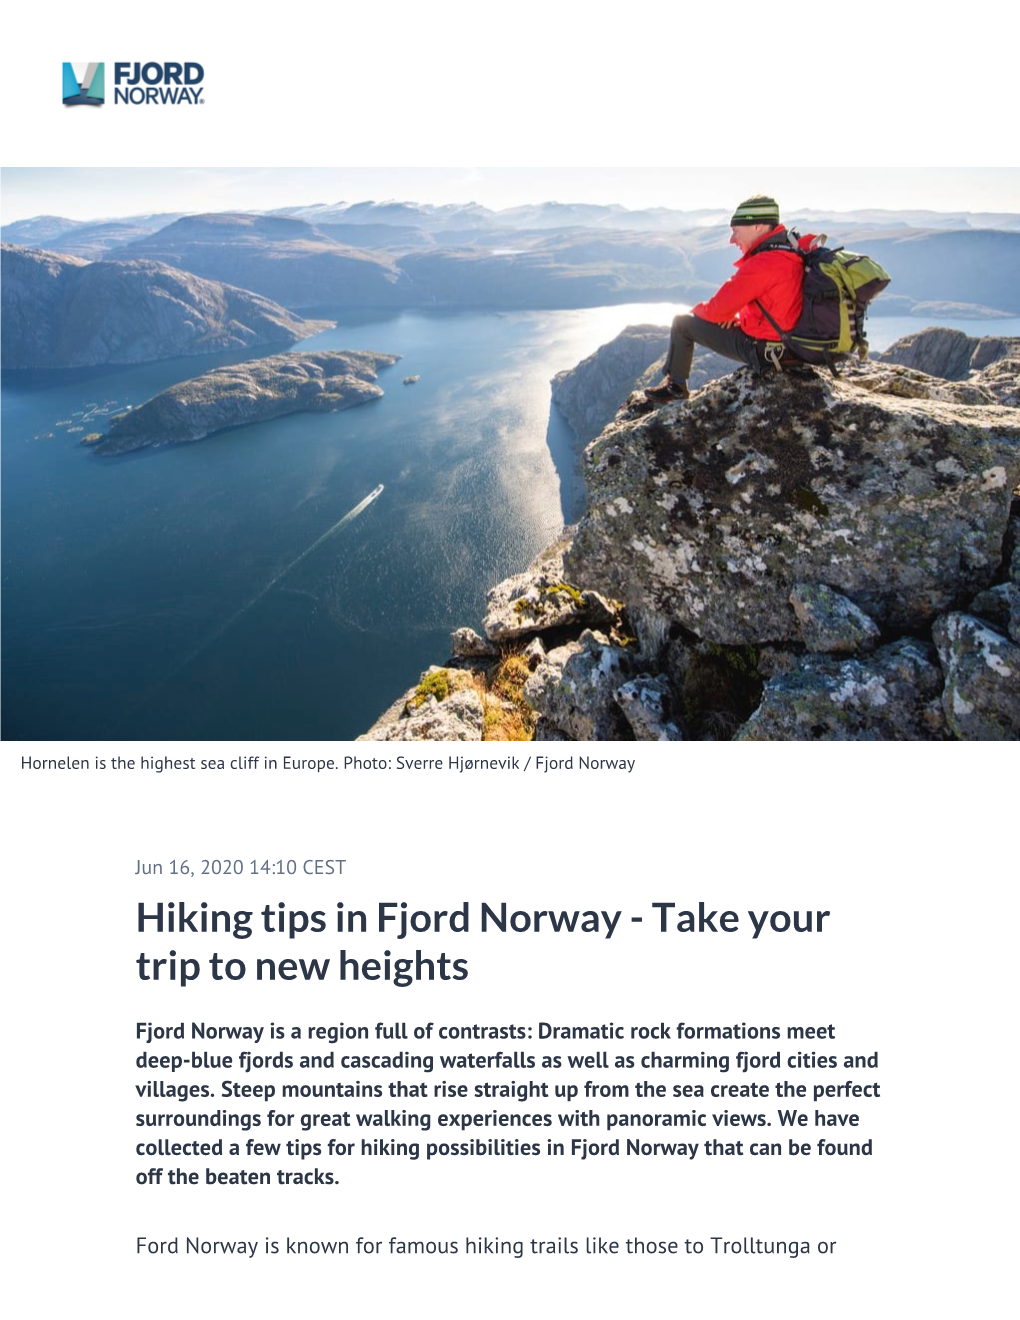 Hiking Tips in Fjord Norway - Take Your Trip to New Heights